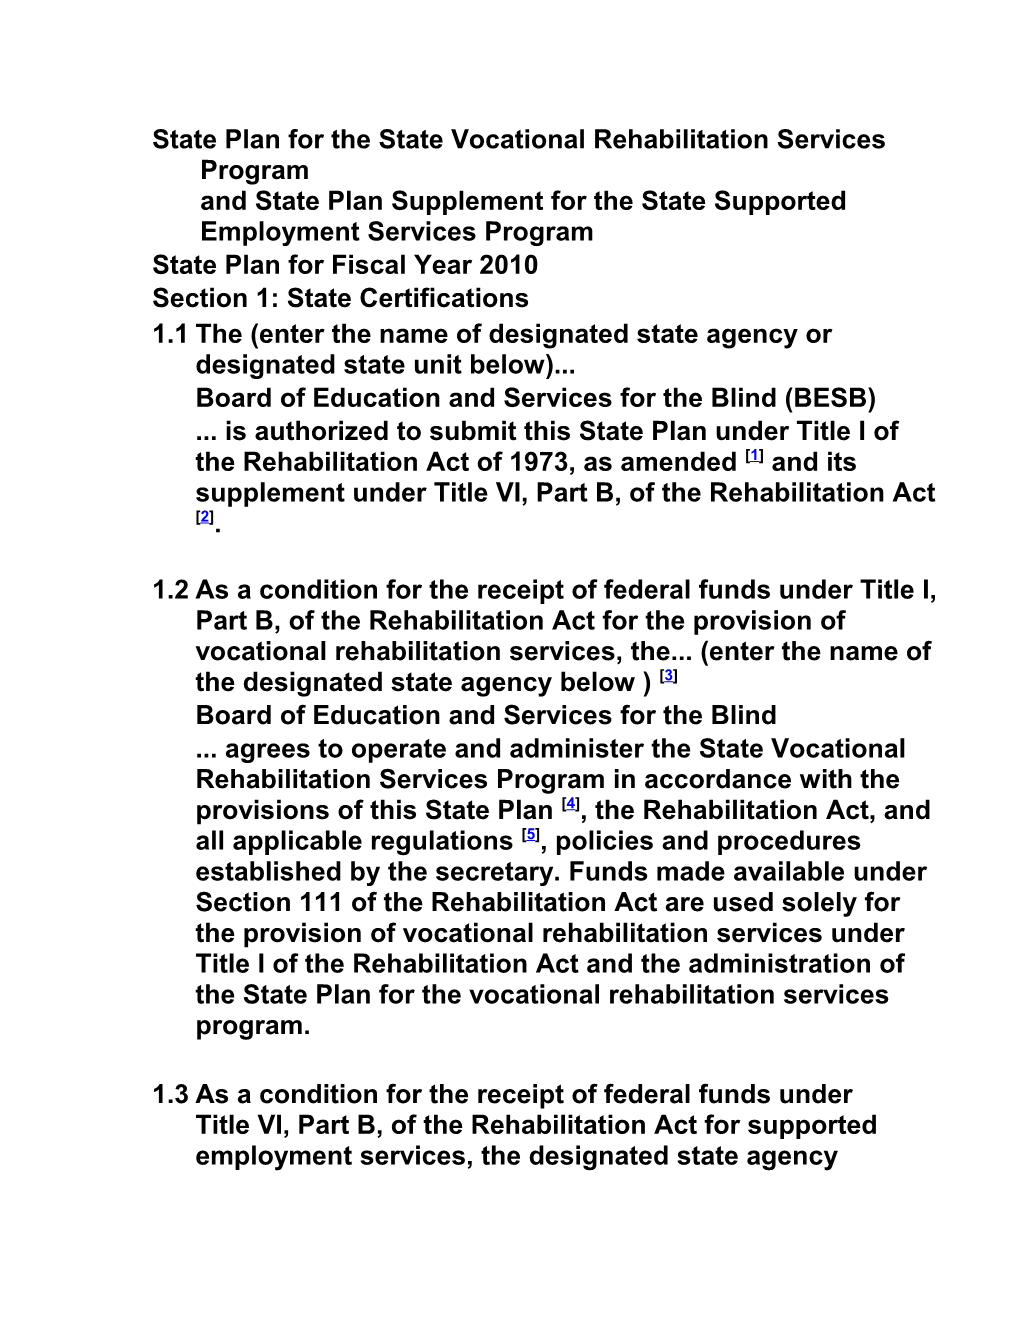 State Plan for the State Vocational Rehabilitation Services Programandstate Plan Supplement